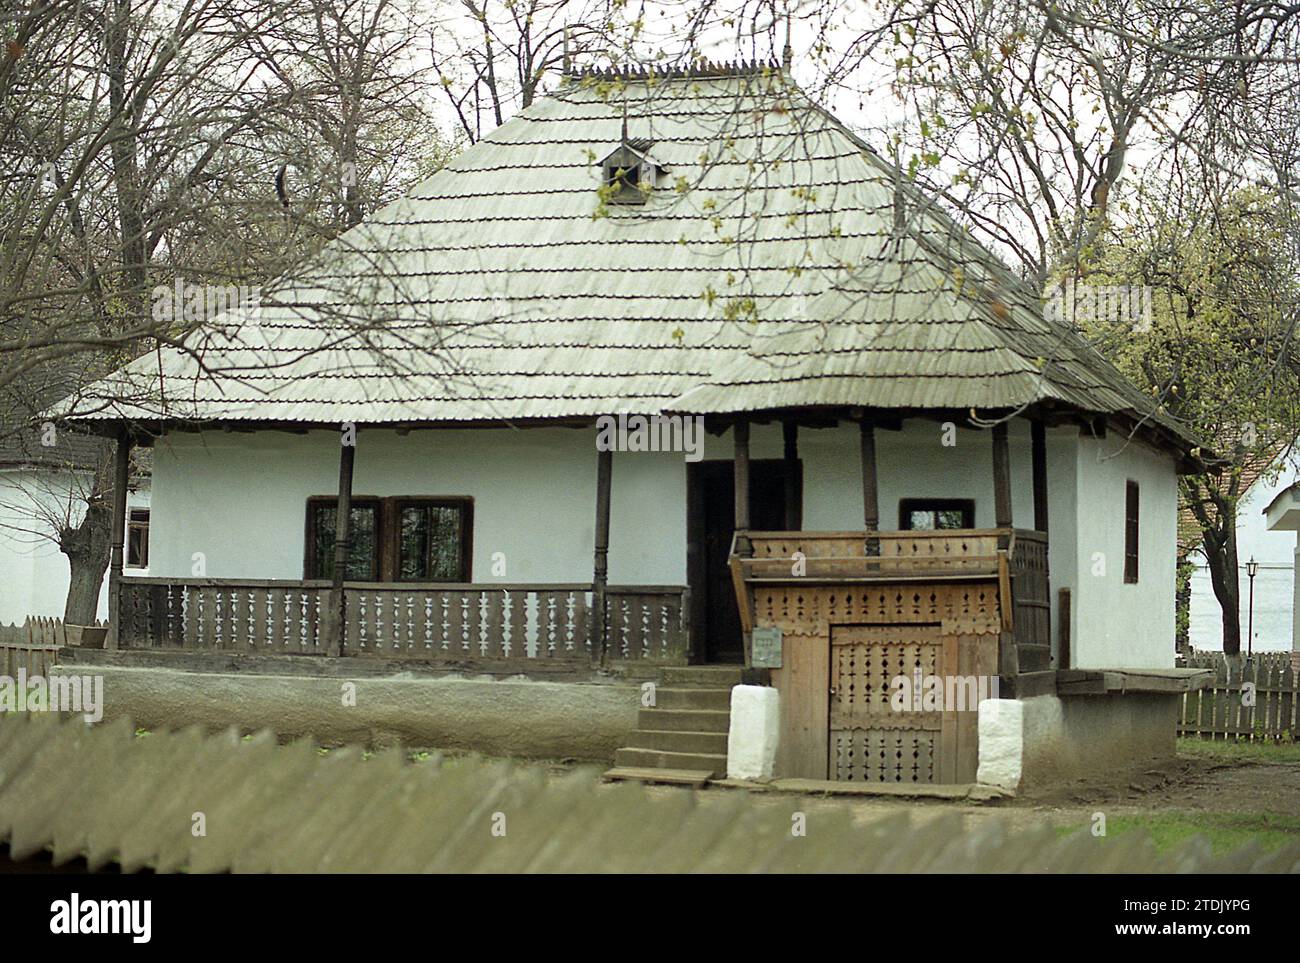 The Village Museum, Bucharest, Romania, approx. 2000. Traditional house from Prahova County with wooden porch and roof and beautifully ornate entrance to the cellar. Stock Photo